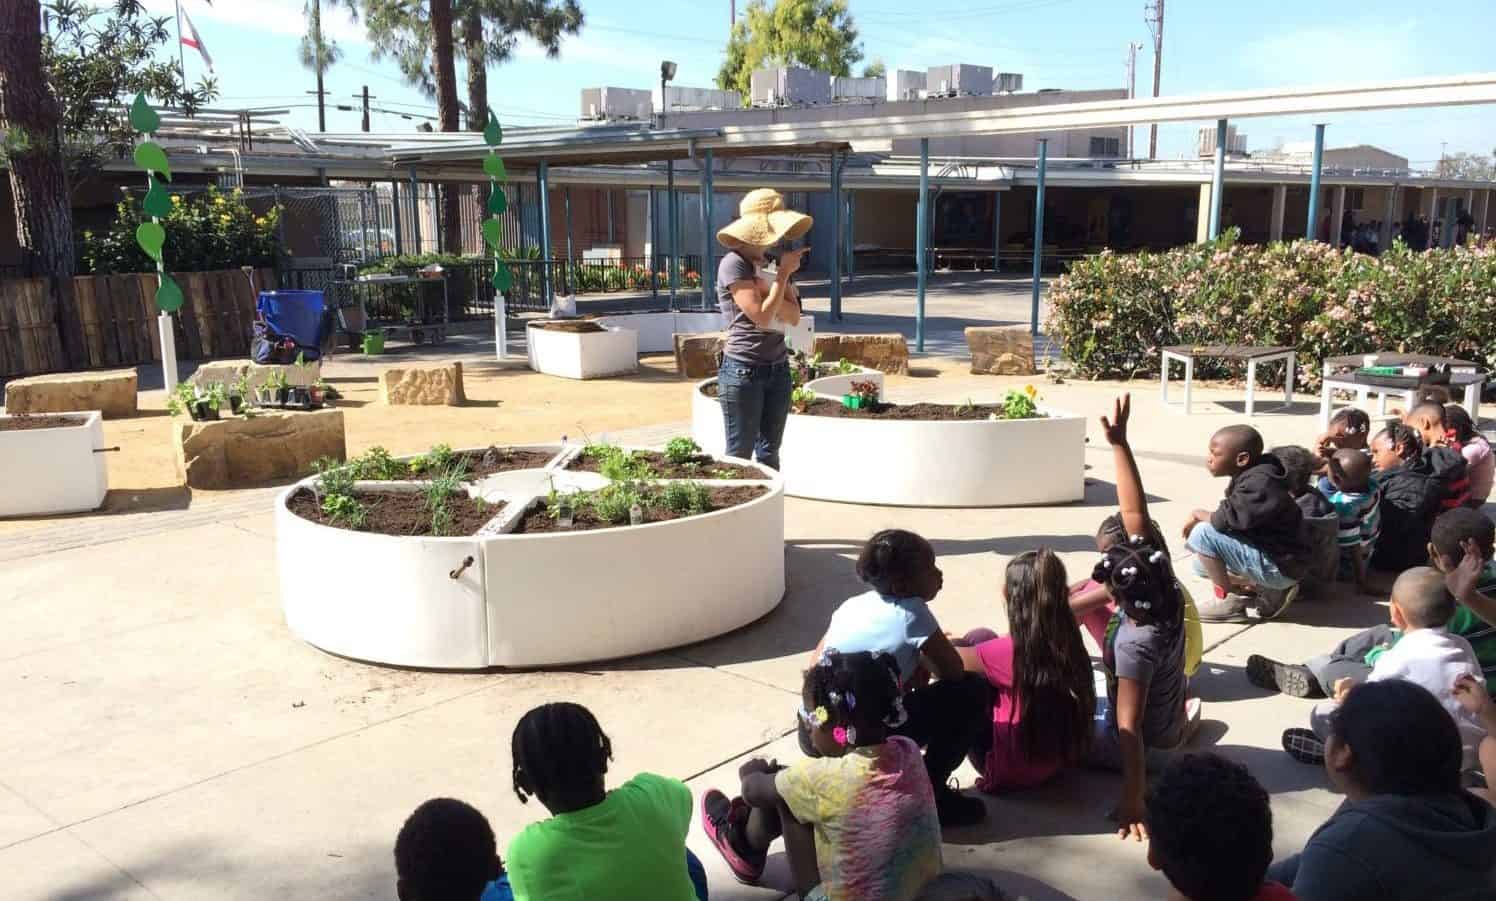 Elementary-school students gather in their school garden to learn how to grow their own food.